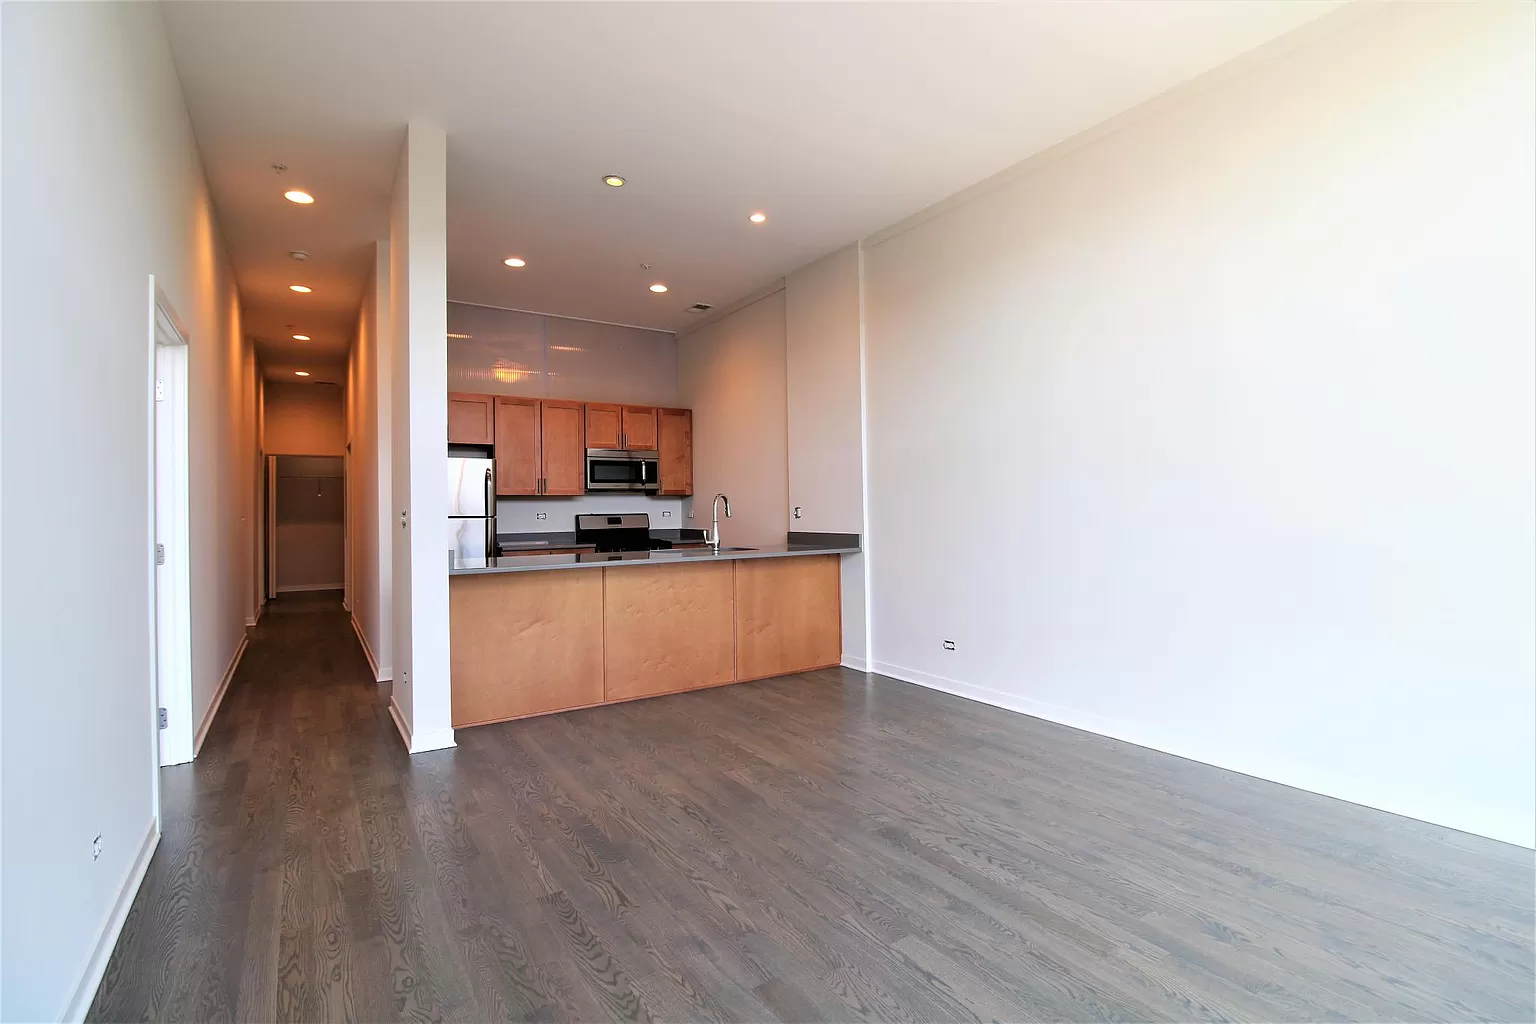 Chicago Housing 2.5 Bed 2 bath apartment - Available for lease takeover or looking for a room mate for Chicago Students in Chicago, IL